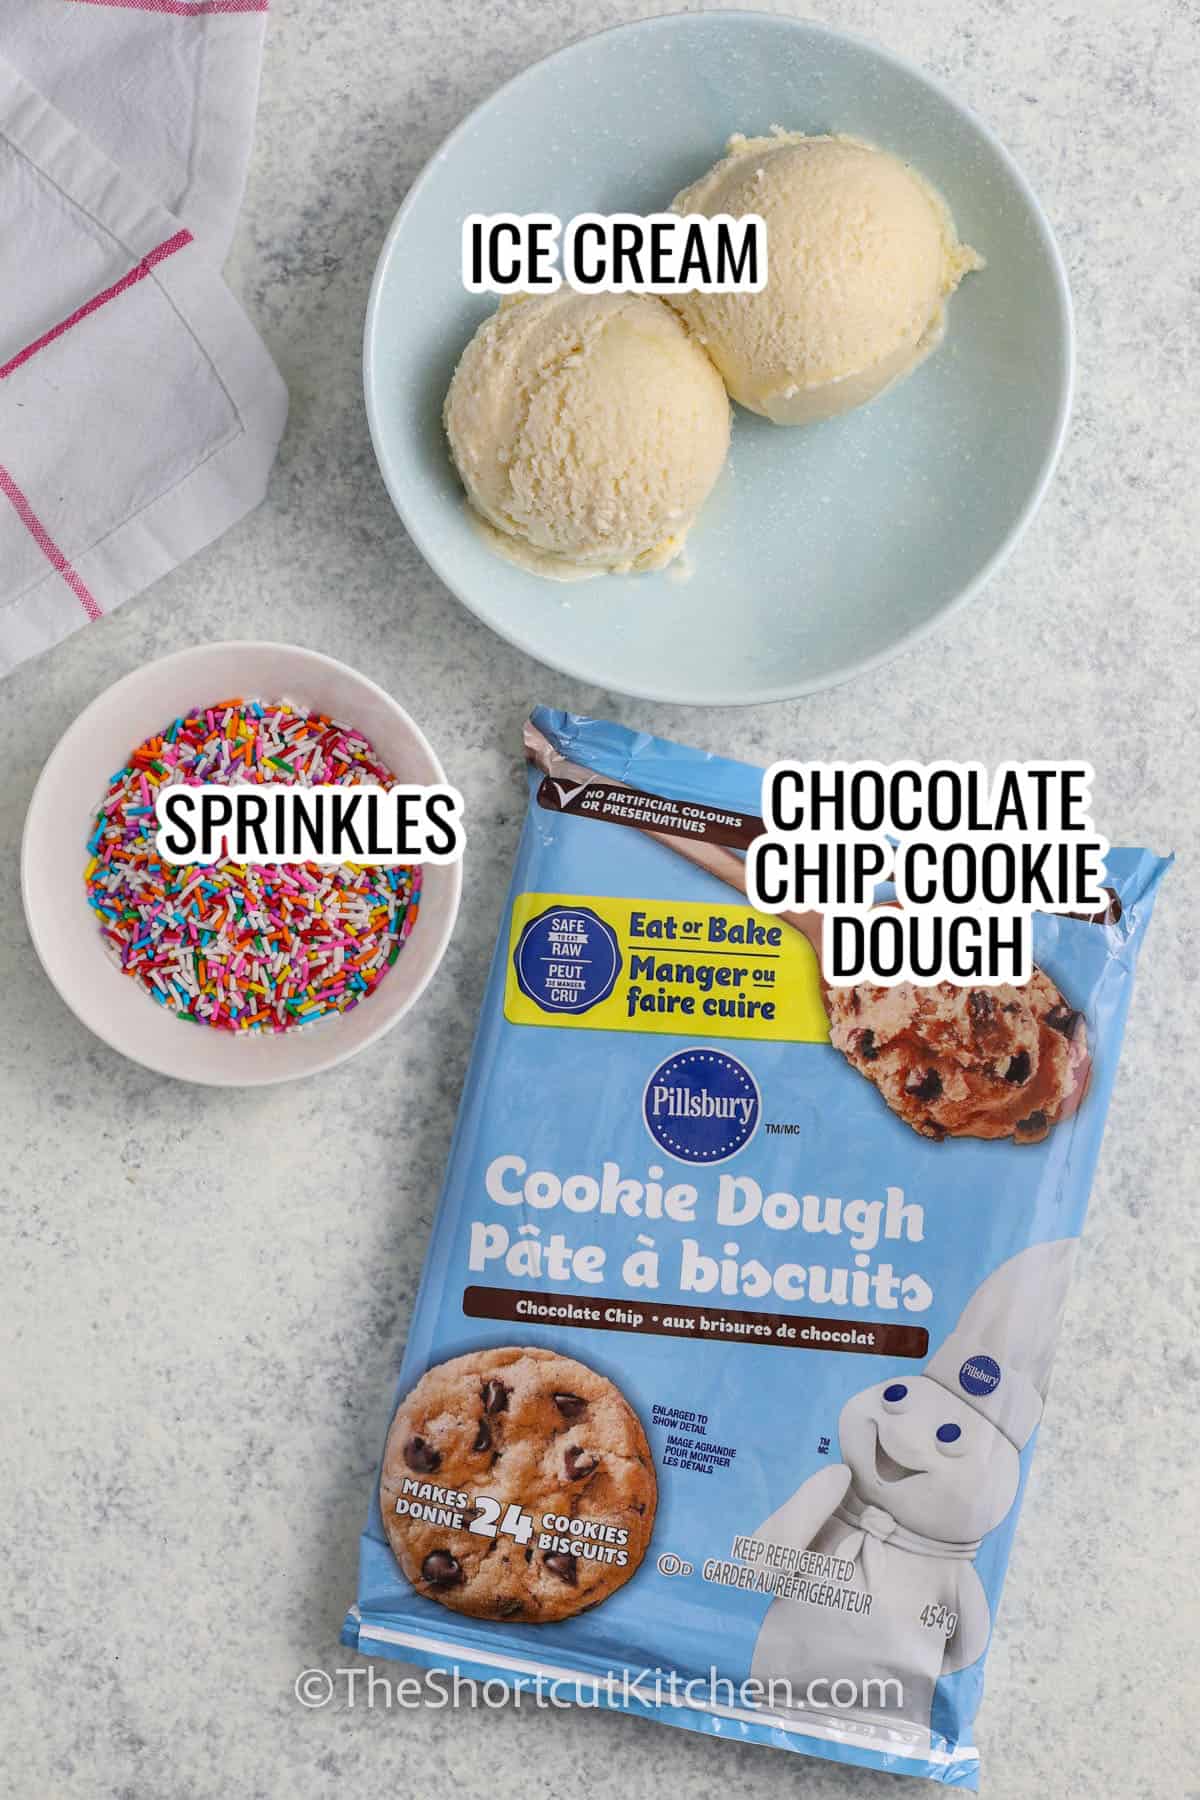 ingredients assembled to make ice cream cookie sandwiches, including ice cream, cookie dough, and sprinkles